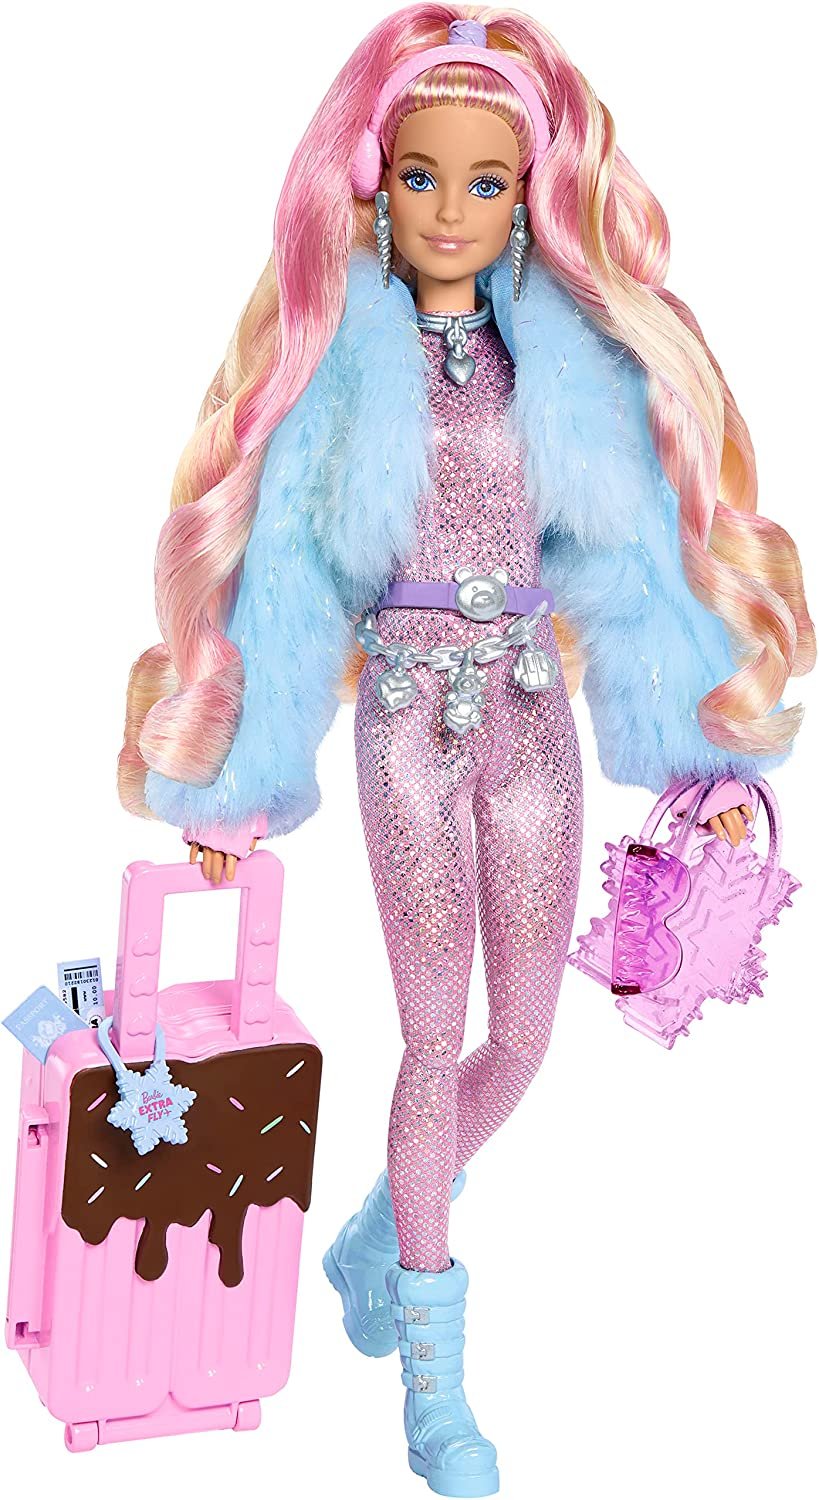 1682924052-youloveit-com-barbie-extra-fly-snow-winter-doll2